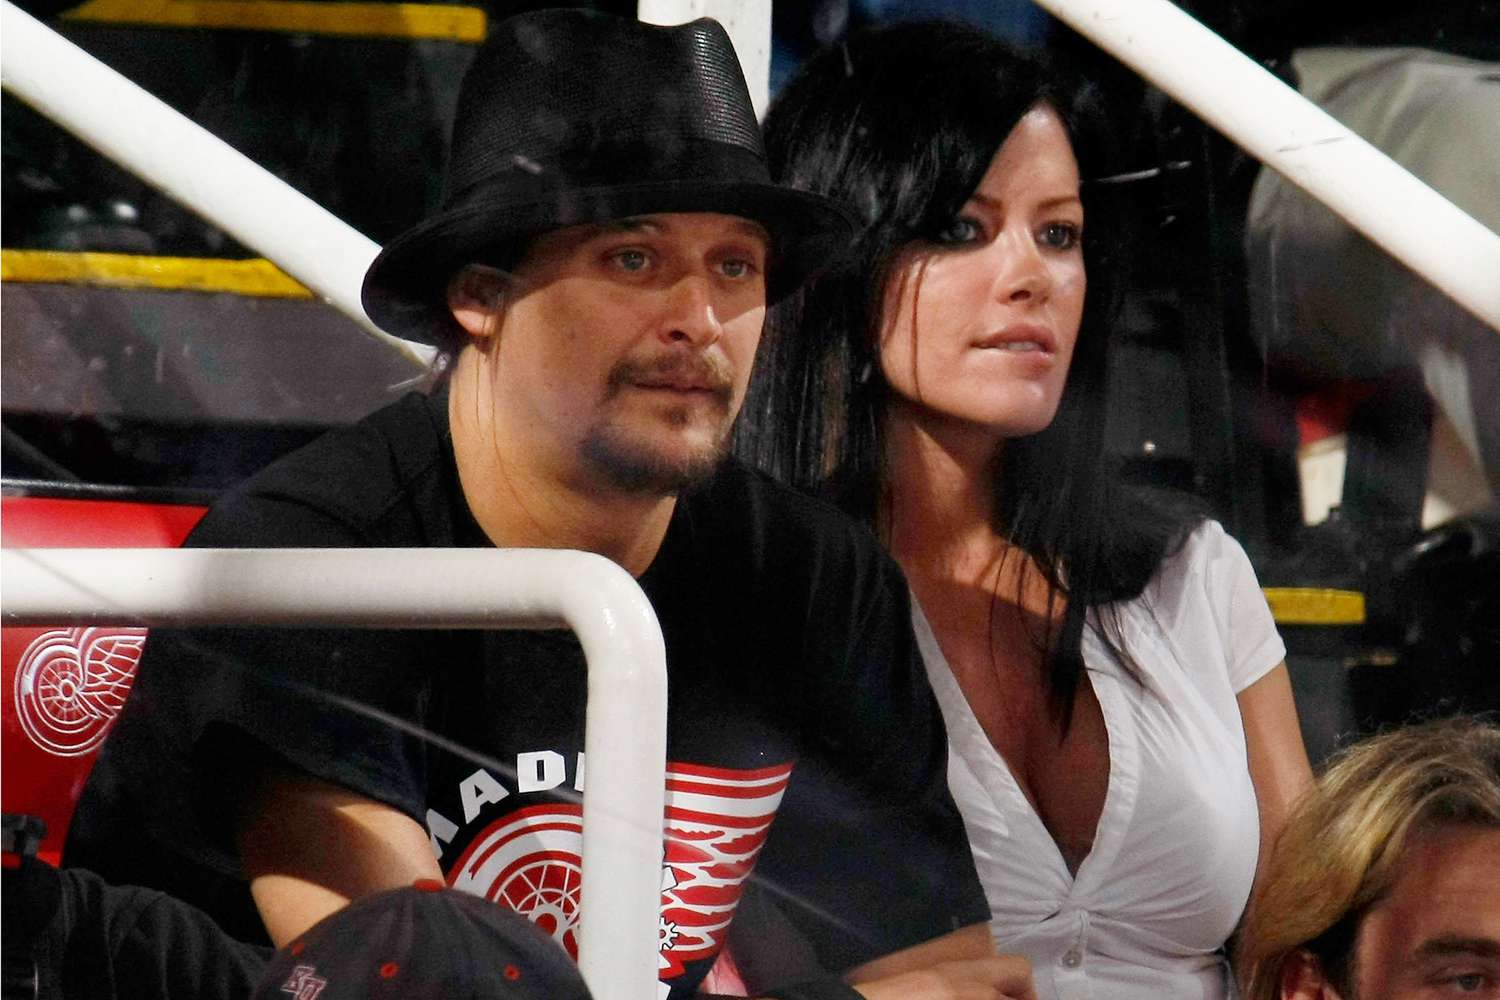 Who Is Kid Rock Dating in 2022? Latest Update on Kid Rock's Relationship and Dating History
